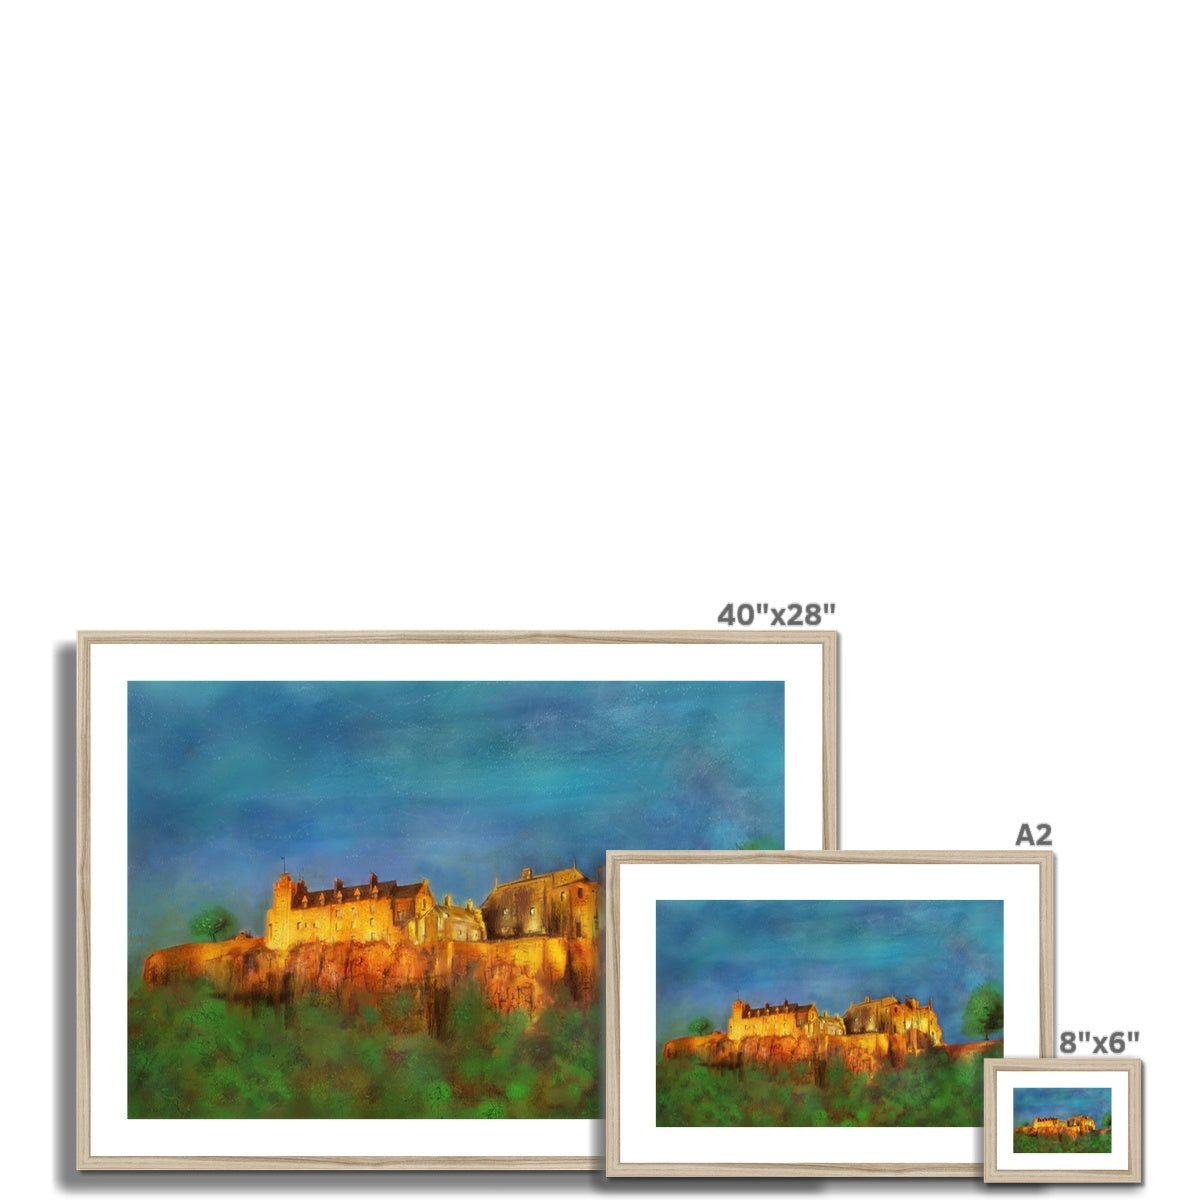 Stirling Castle Painting | Framed & Mounted Prints From Scotland-Framed & Mounted Prints-Historic & Iconic Scotland Art Gallery-Paintings, Prints, Homeware, Art Gifts From Scotland By Scottish Artist Kevin Hunter